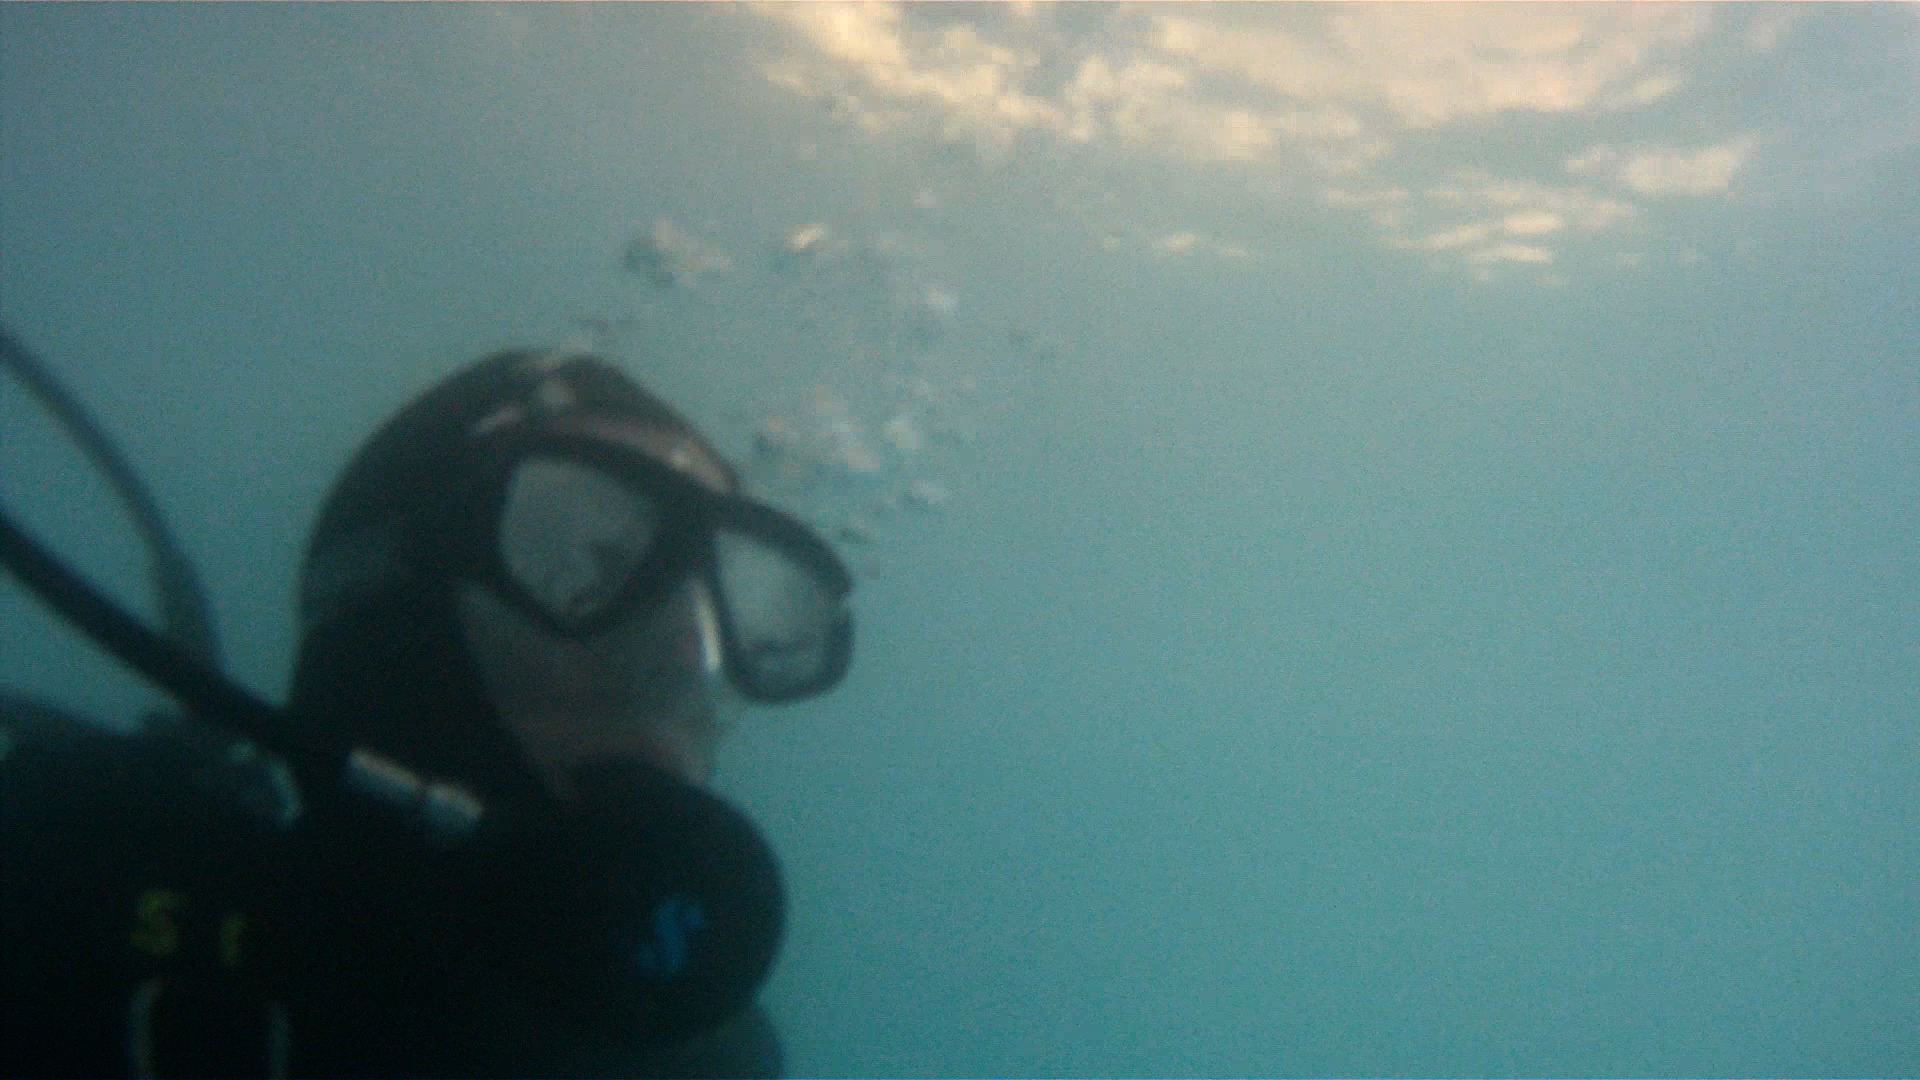 Production still for Don't Swim Alone. Directing underwater.